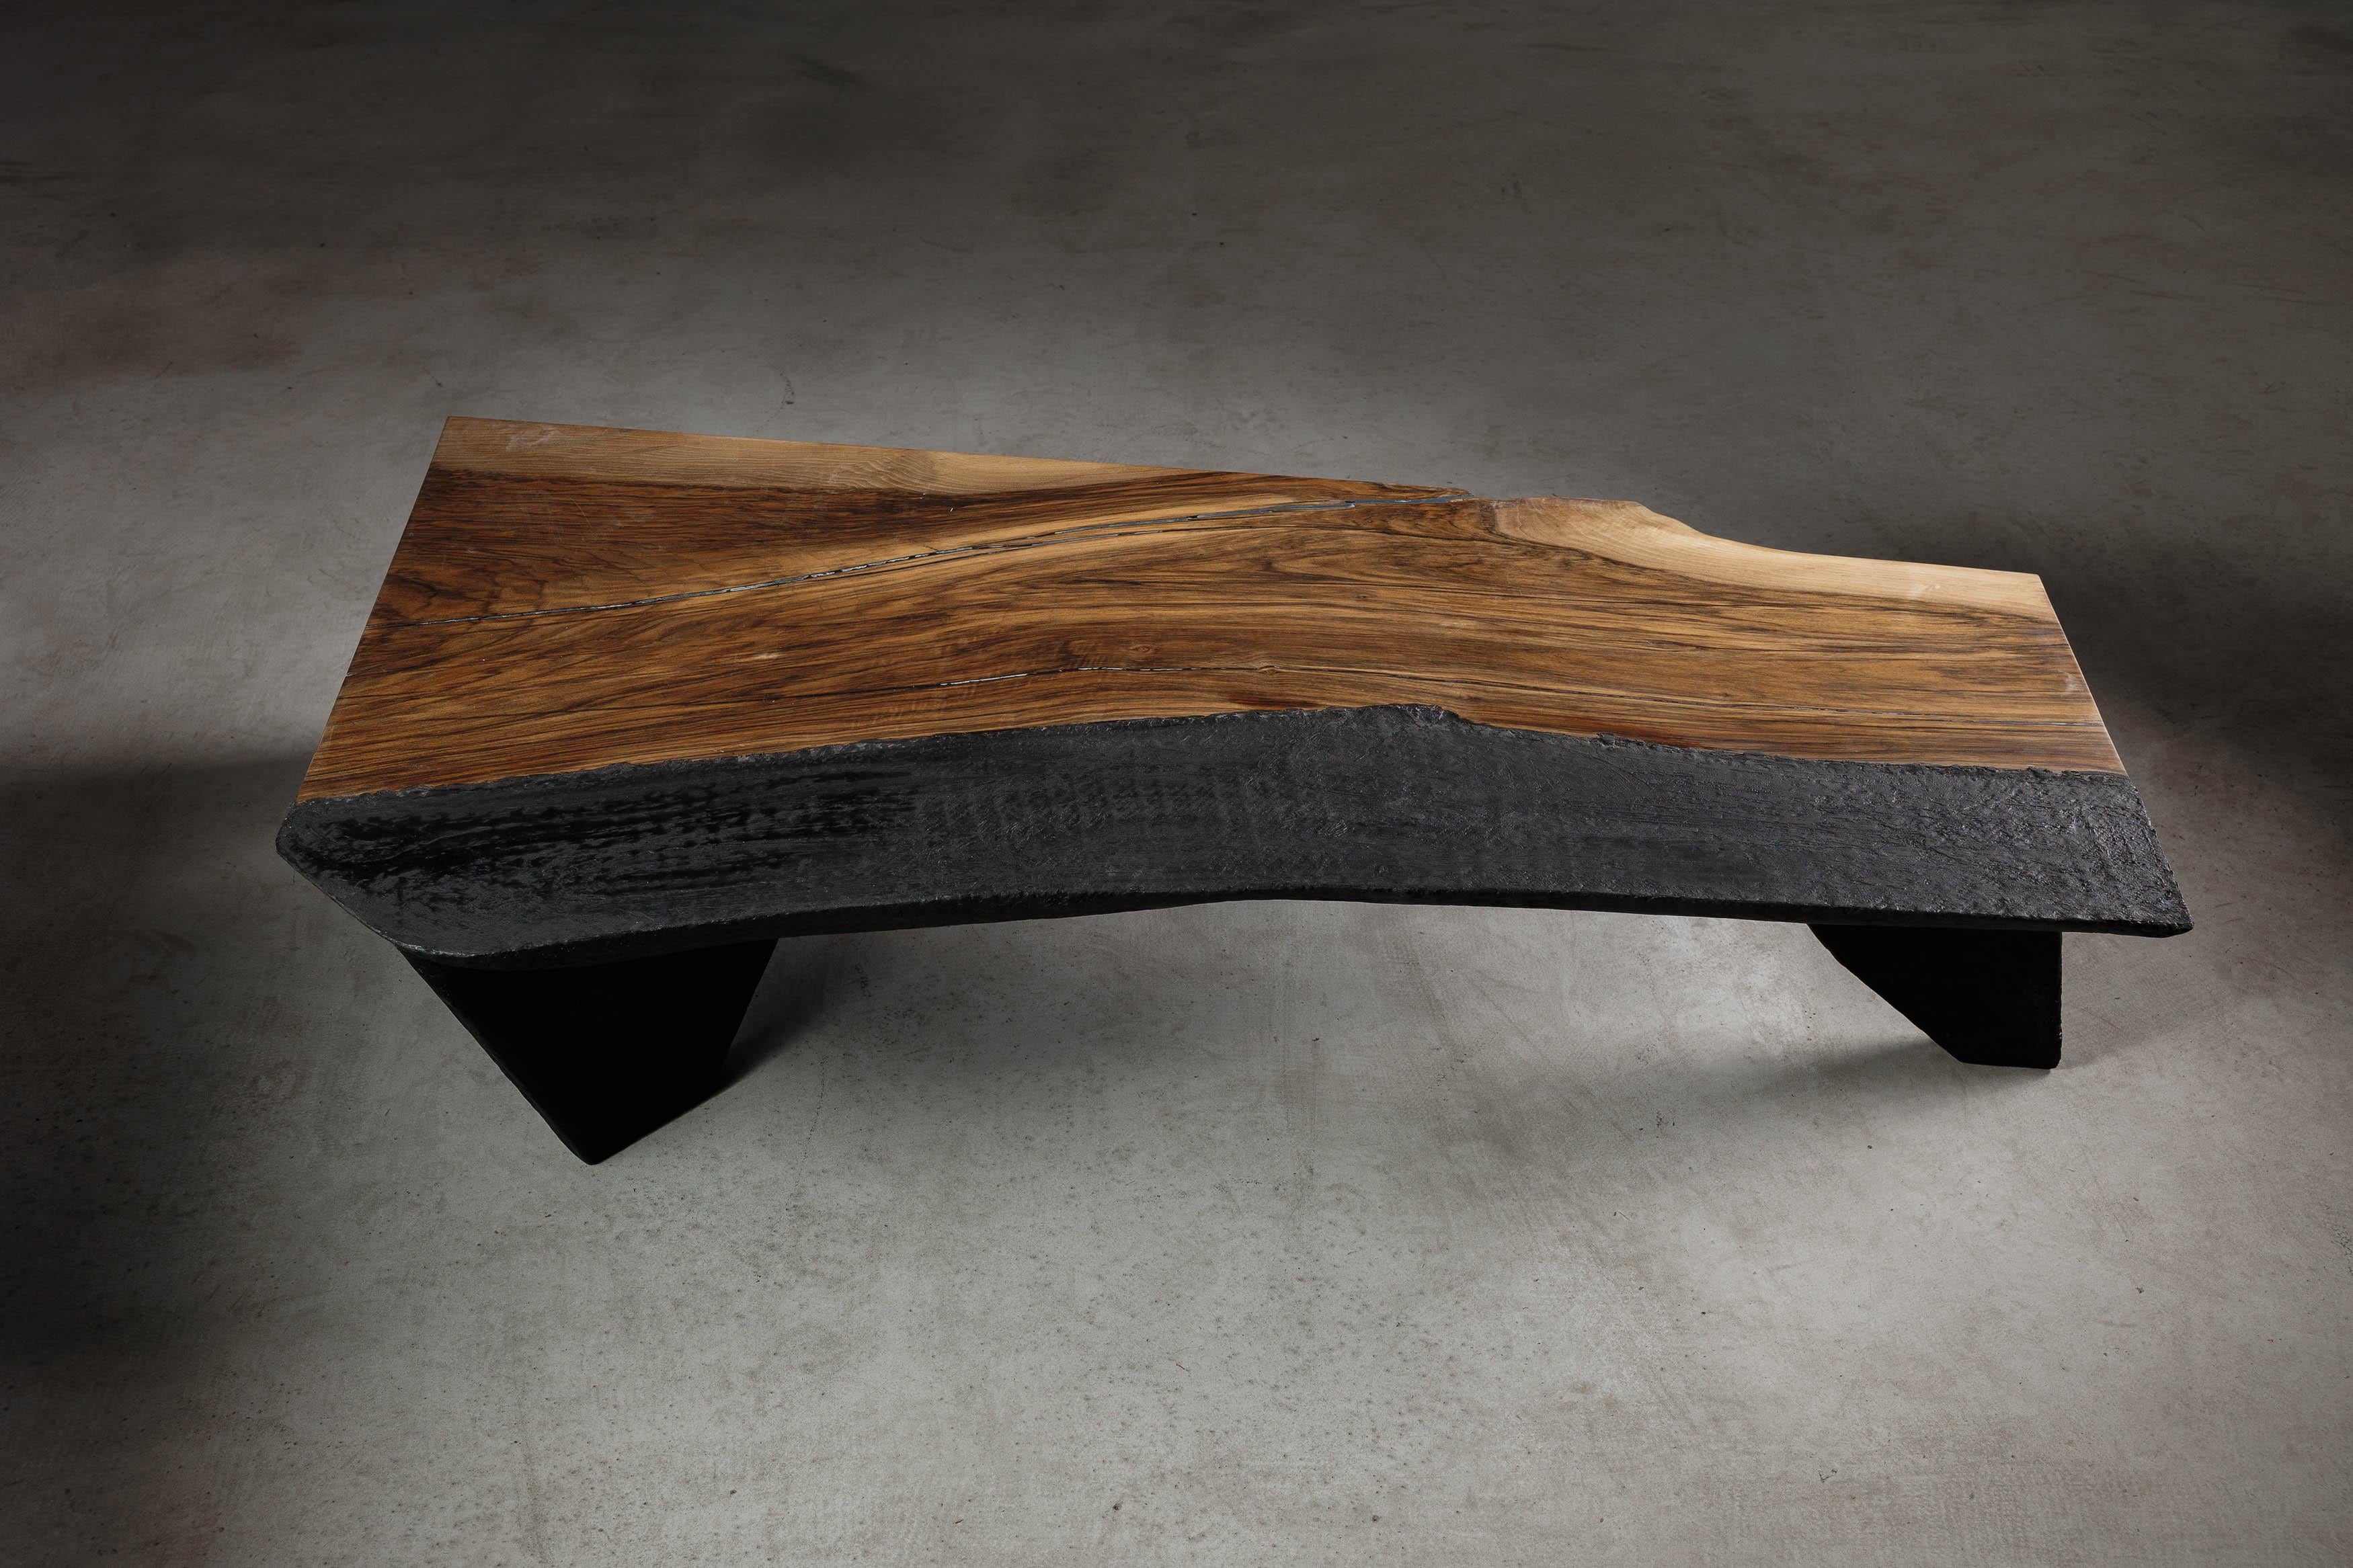 Romanian Contemporary Walnut Brutalist Coffee Table by Eero Moss - EM106 For Sale